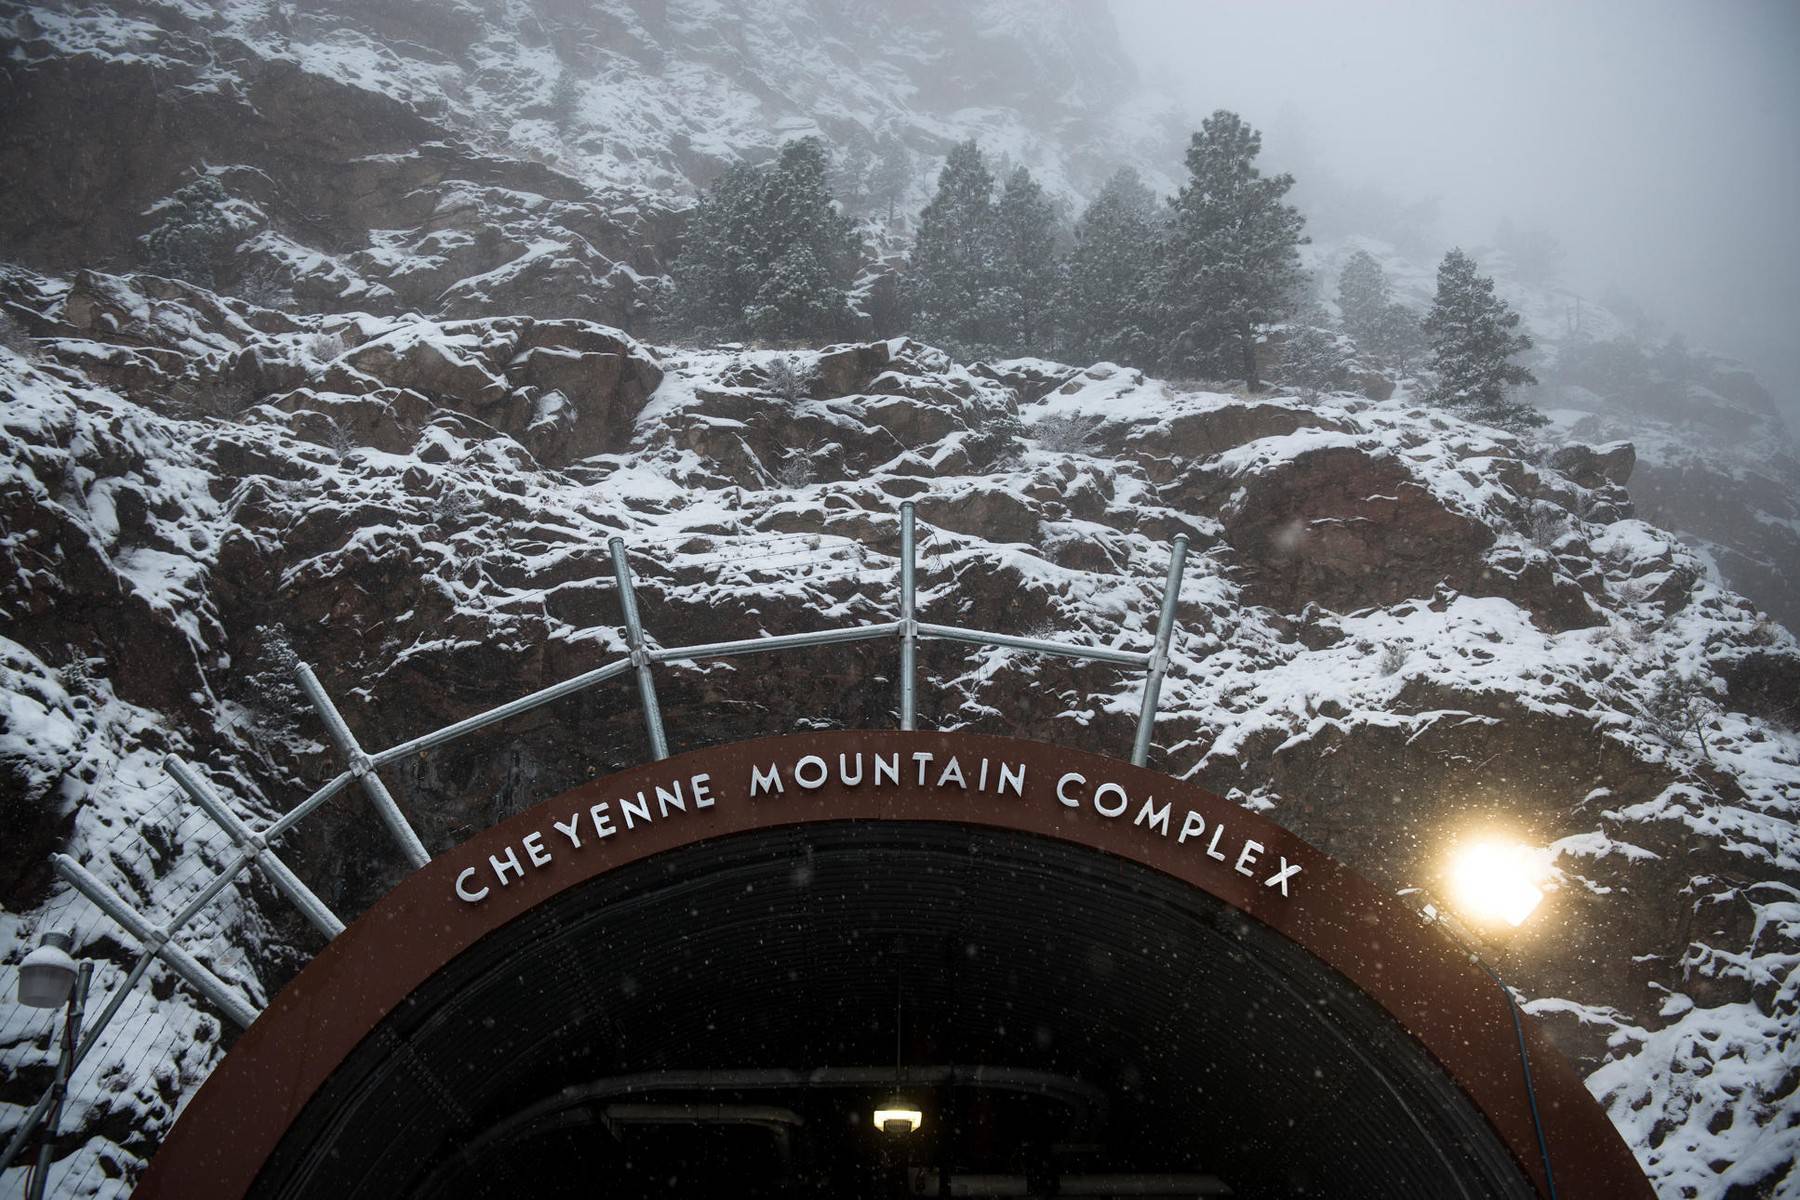 The Cheyenne Mountain Complex is a military installation and nuclear bunker located at the Cheyenne Mountain Air Force Station in Colorado Springs, Colorado. /Staff Sgt. Andrew Lee